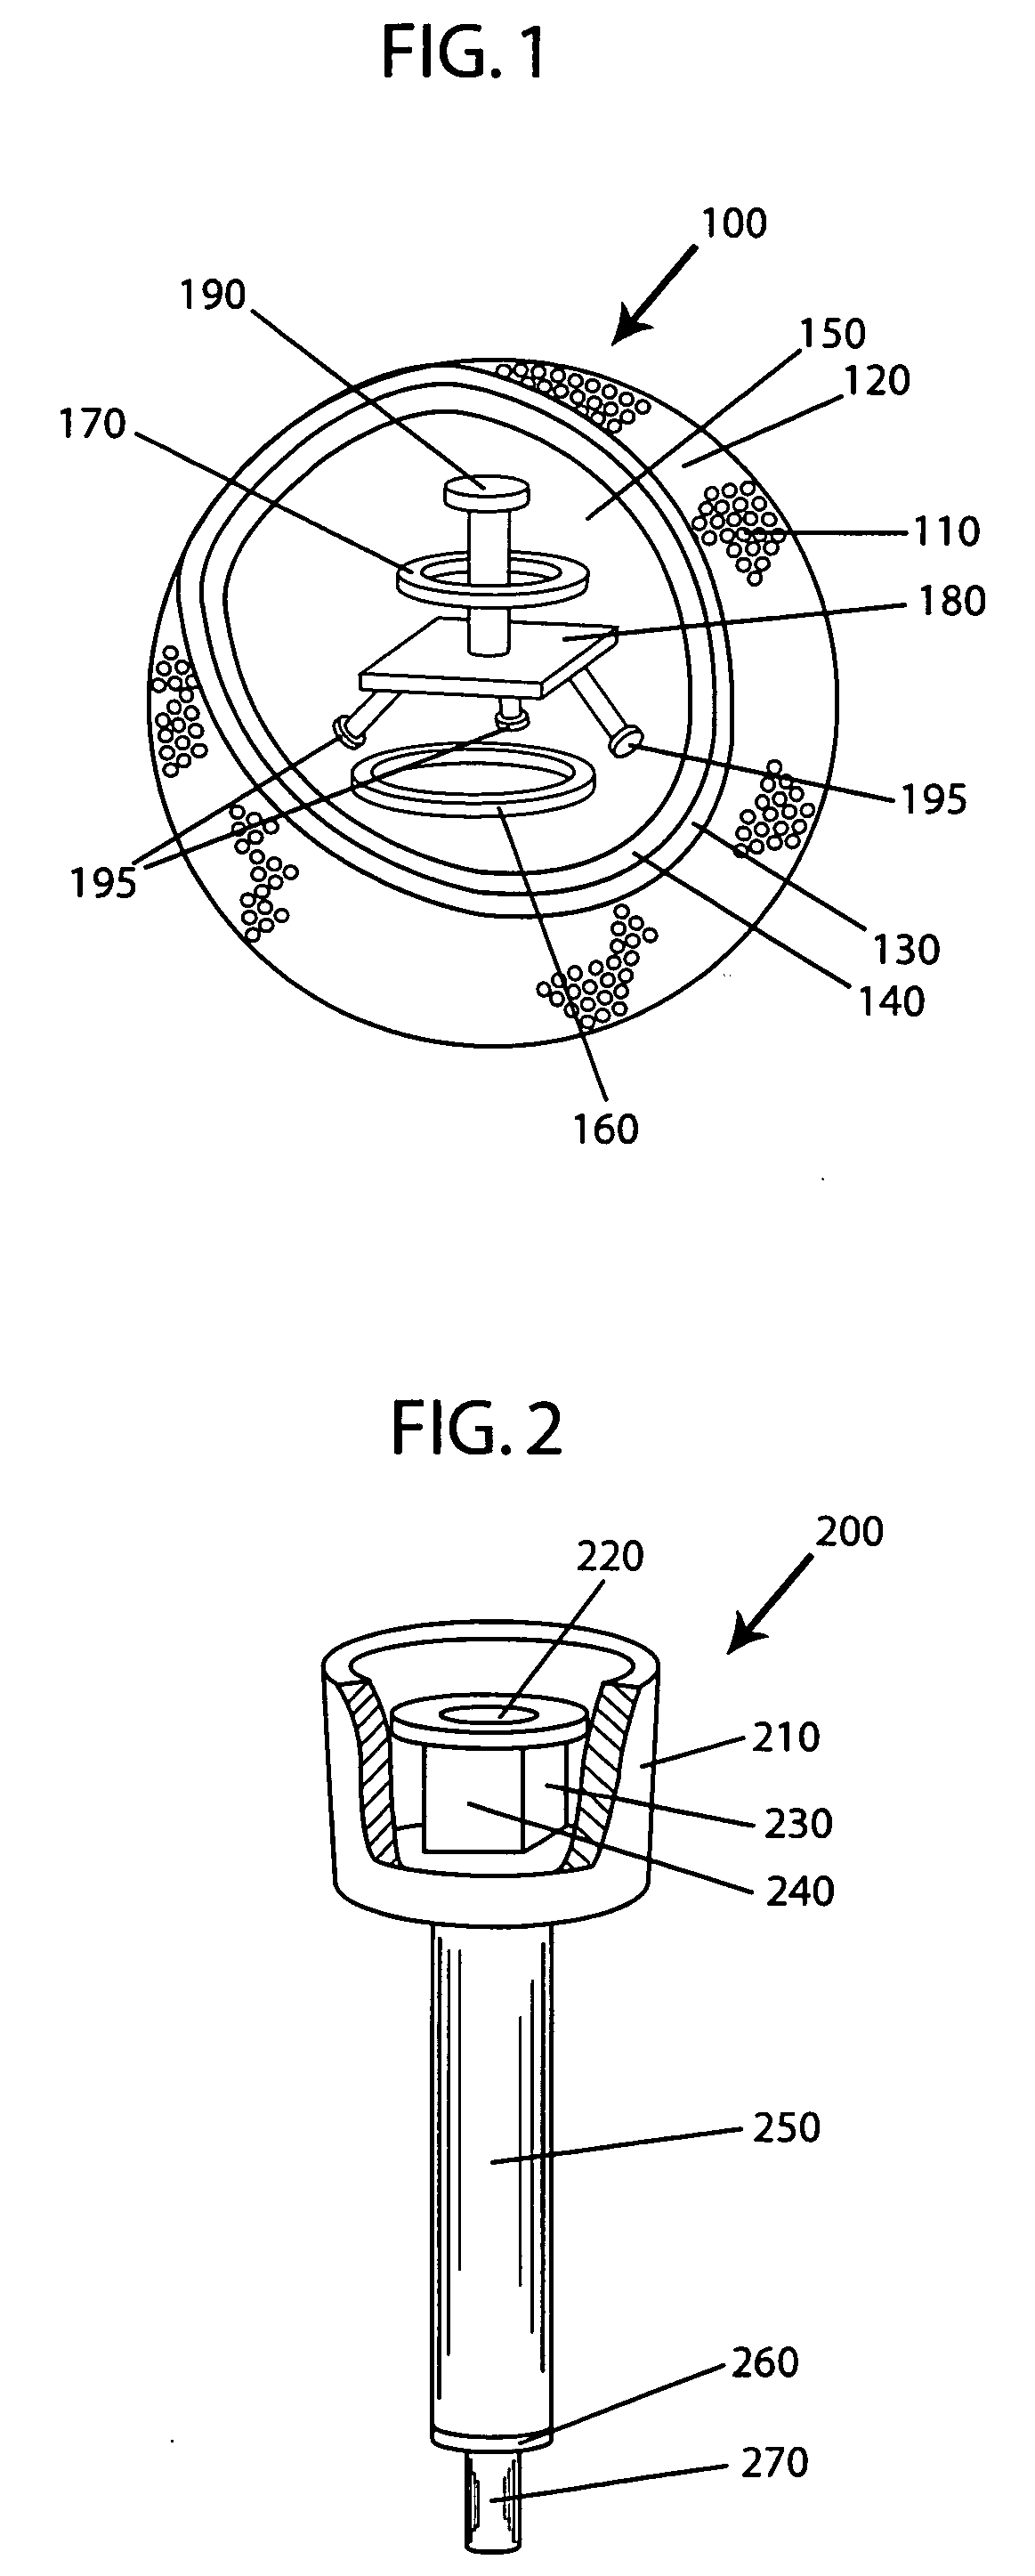 Method of determining a flight trajectory and extracting flight data for a trackable golf ball